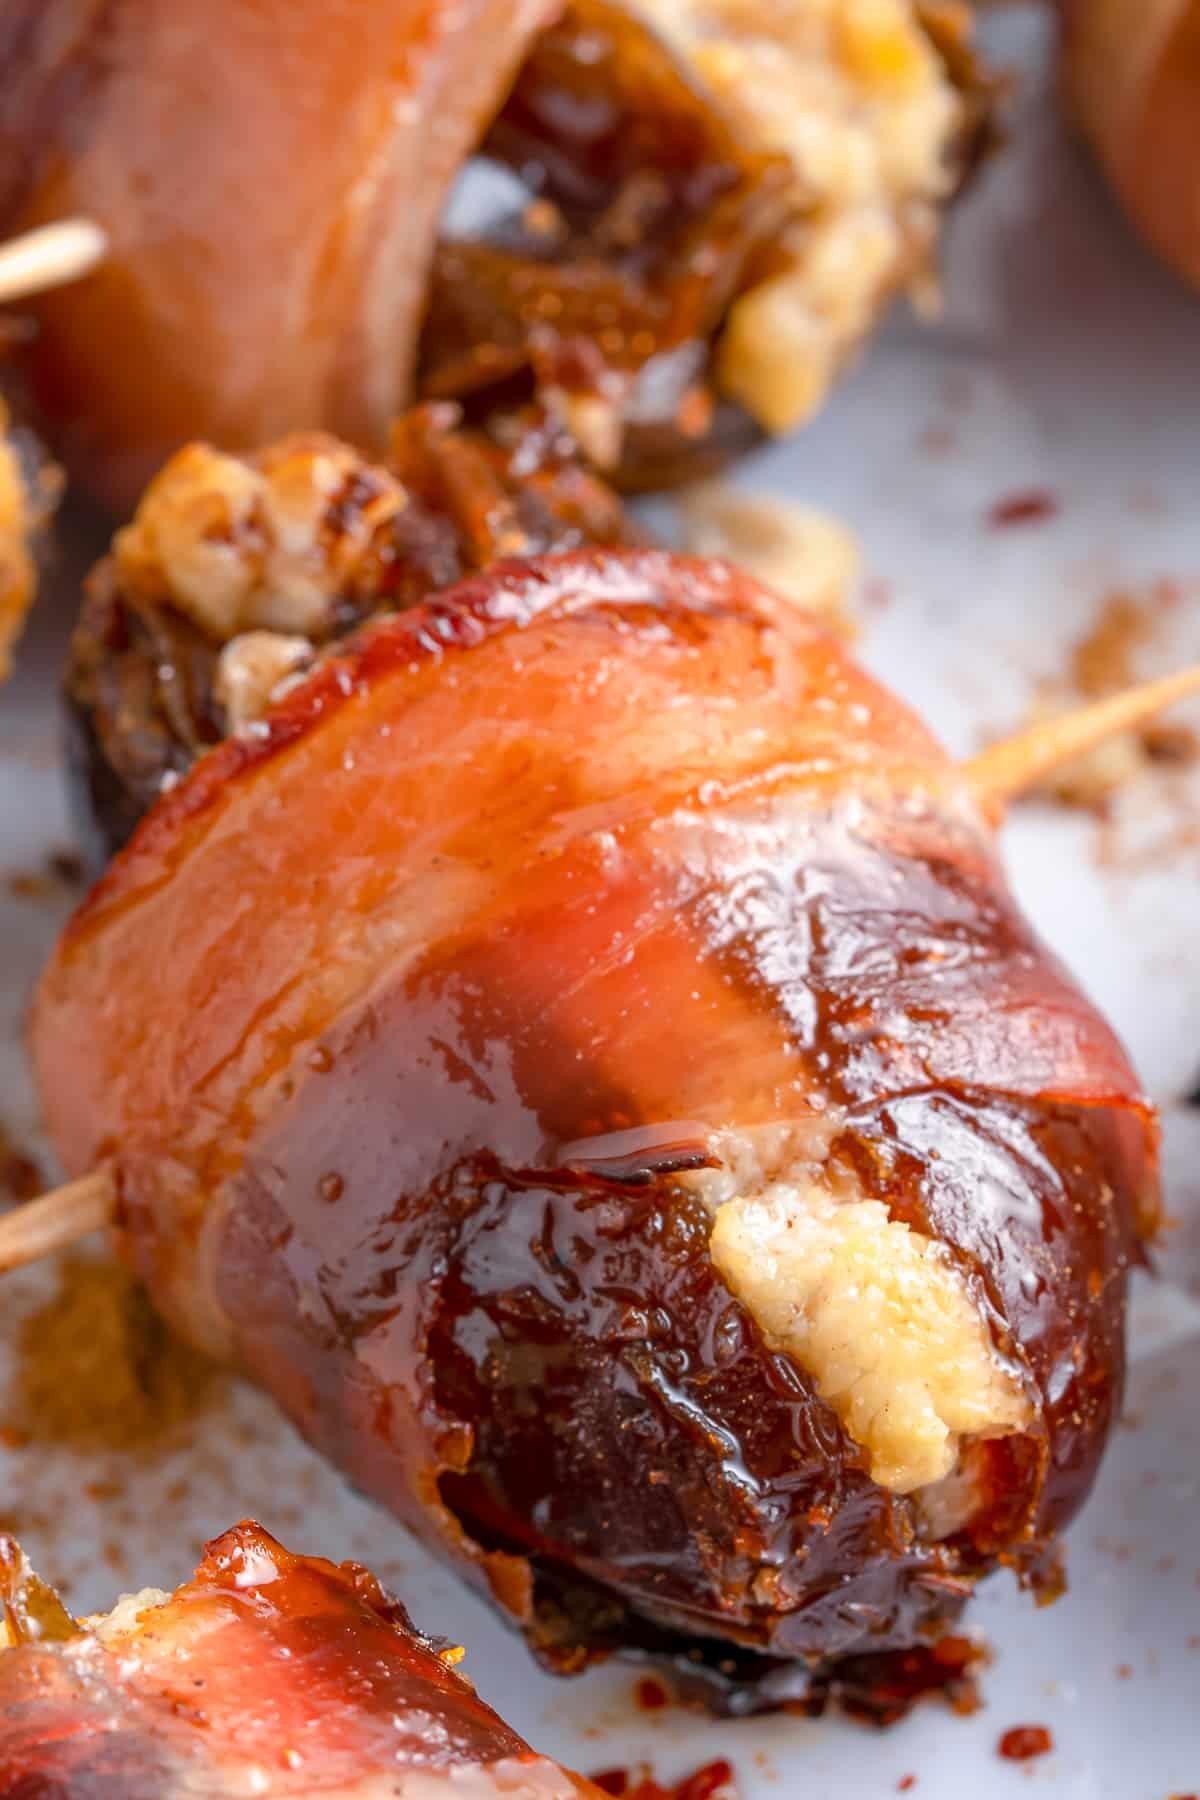 Close up of one of the dates showing browned bacon and creamy filling.